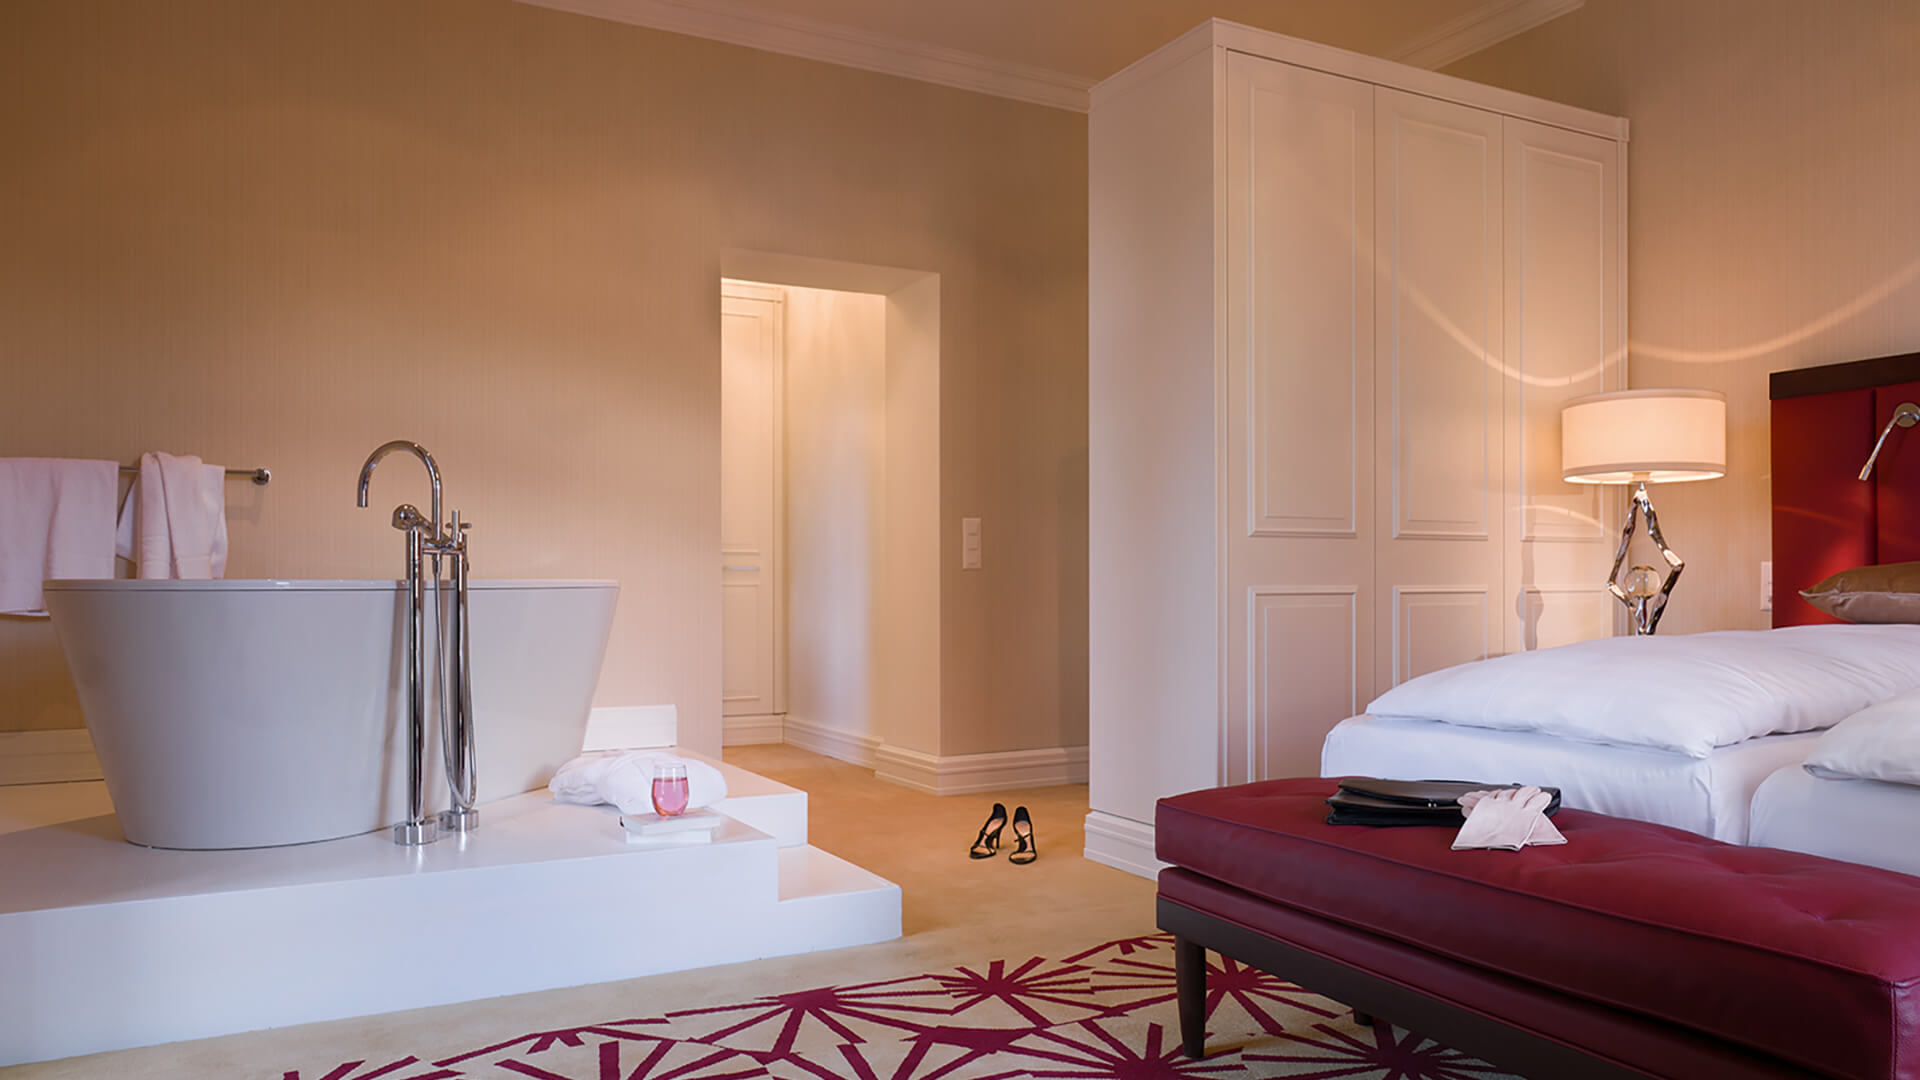 an interior shot of a two bed suite. The two beds are donned in white linens and there are accents of red around the room in the headboards, bench, and carpet. There is a white stand alone tub in the corner of the room.